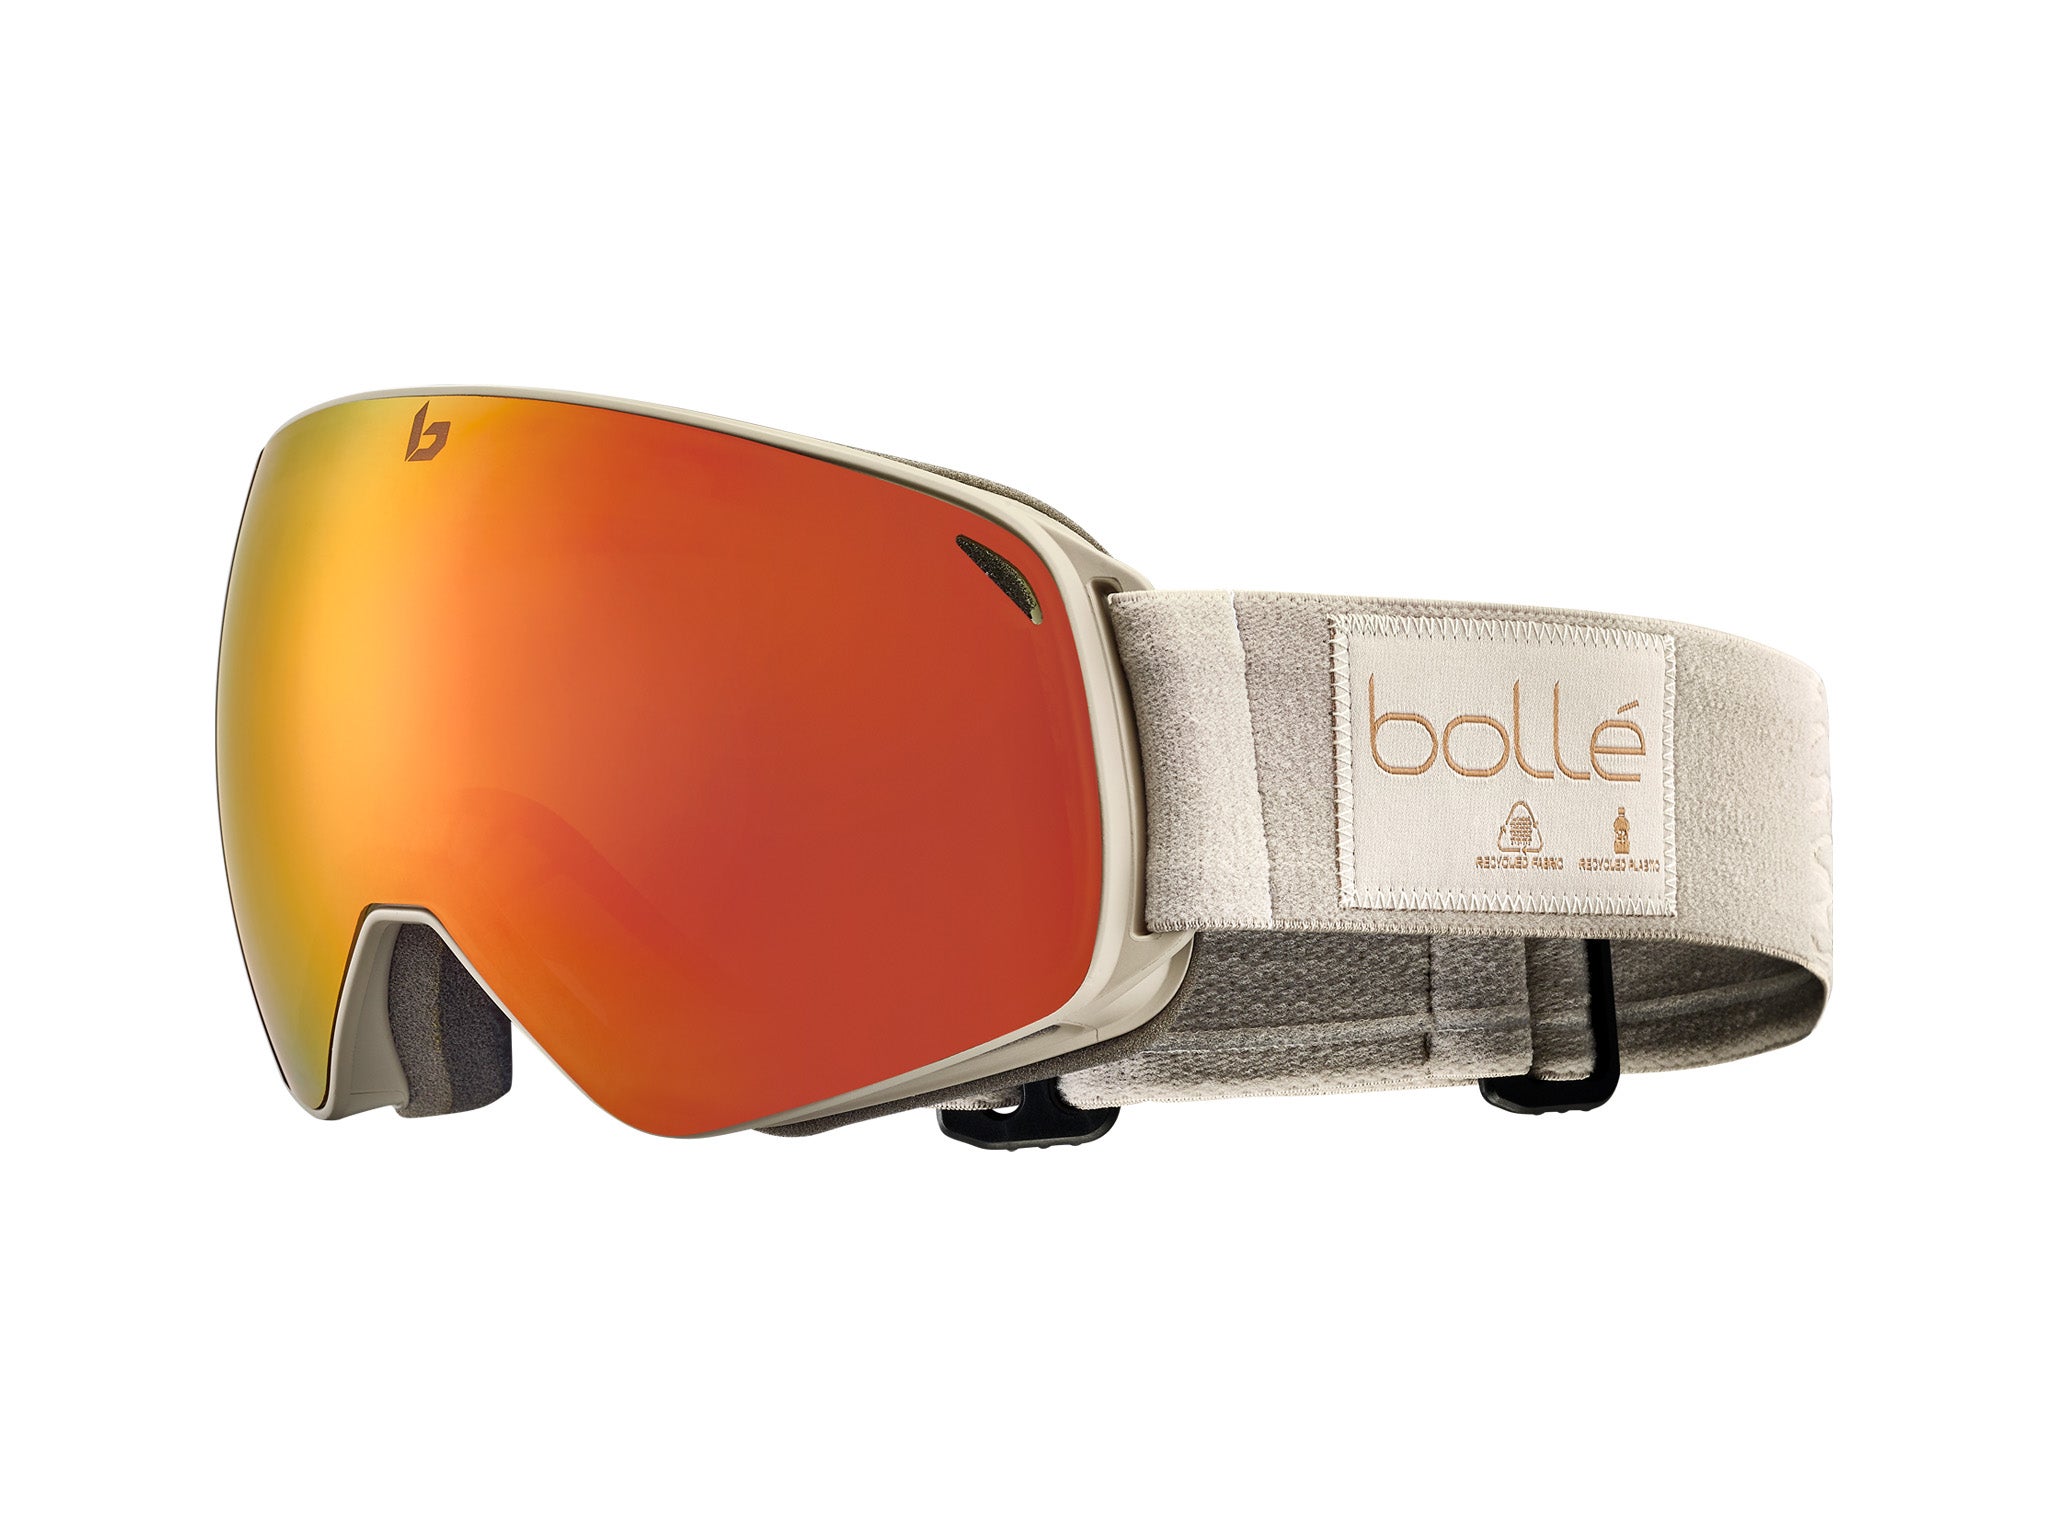 bolle-eco-Indybest-goggle-review